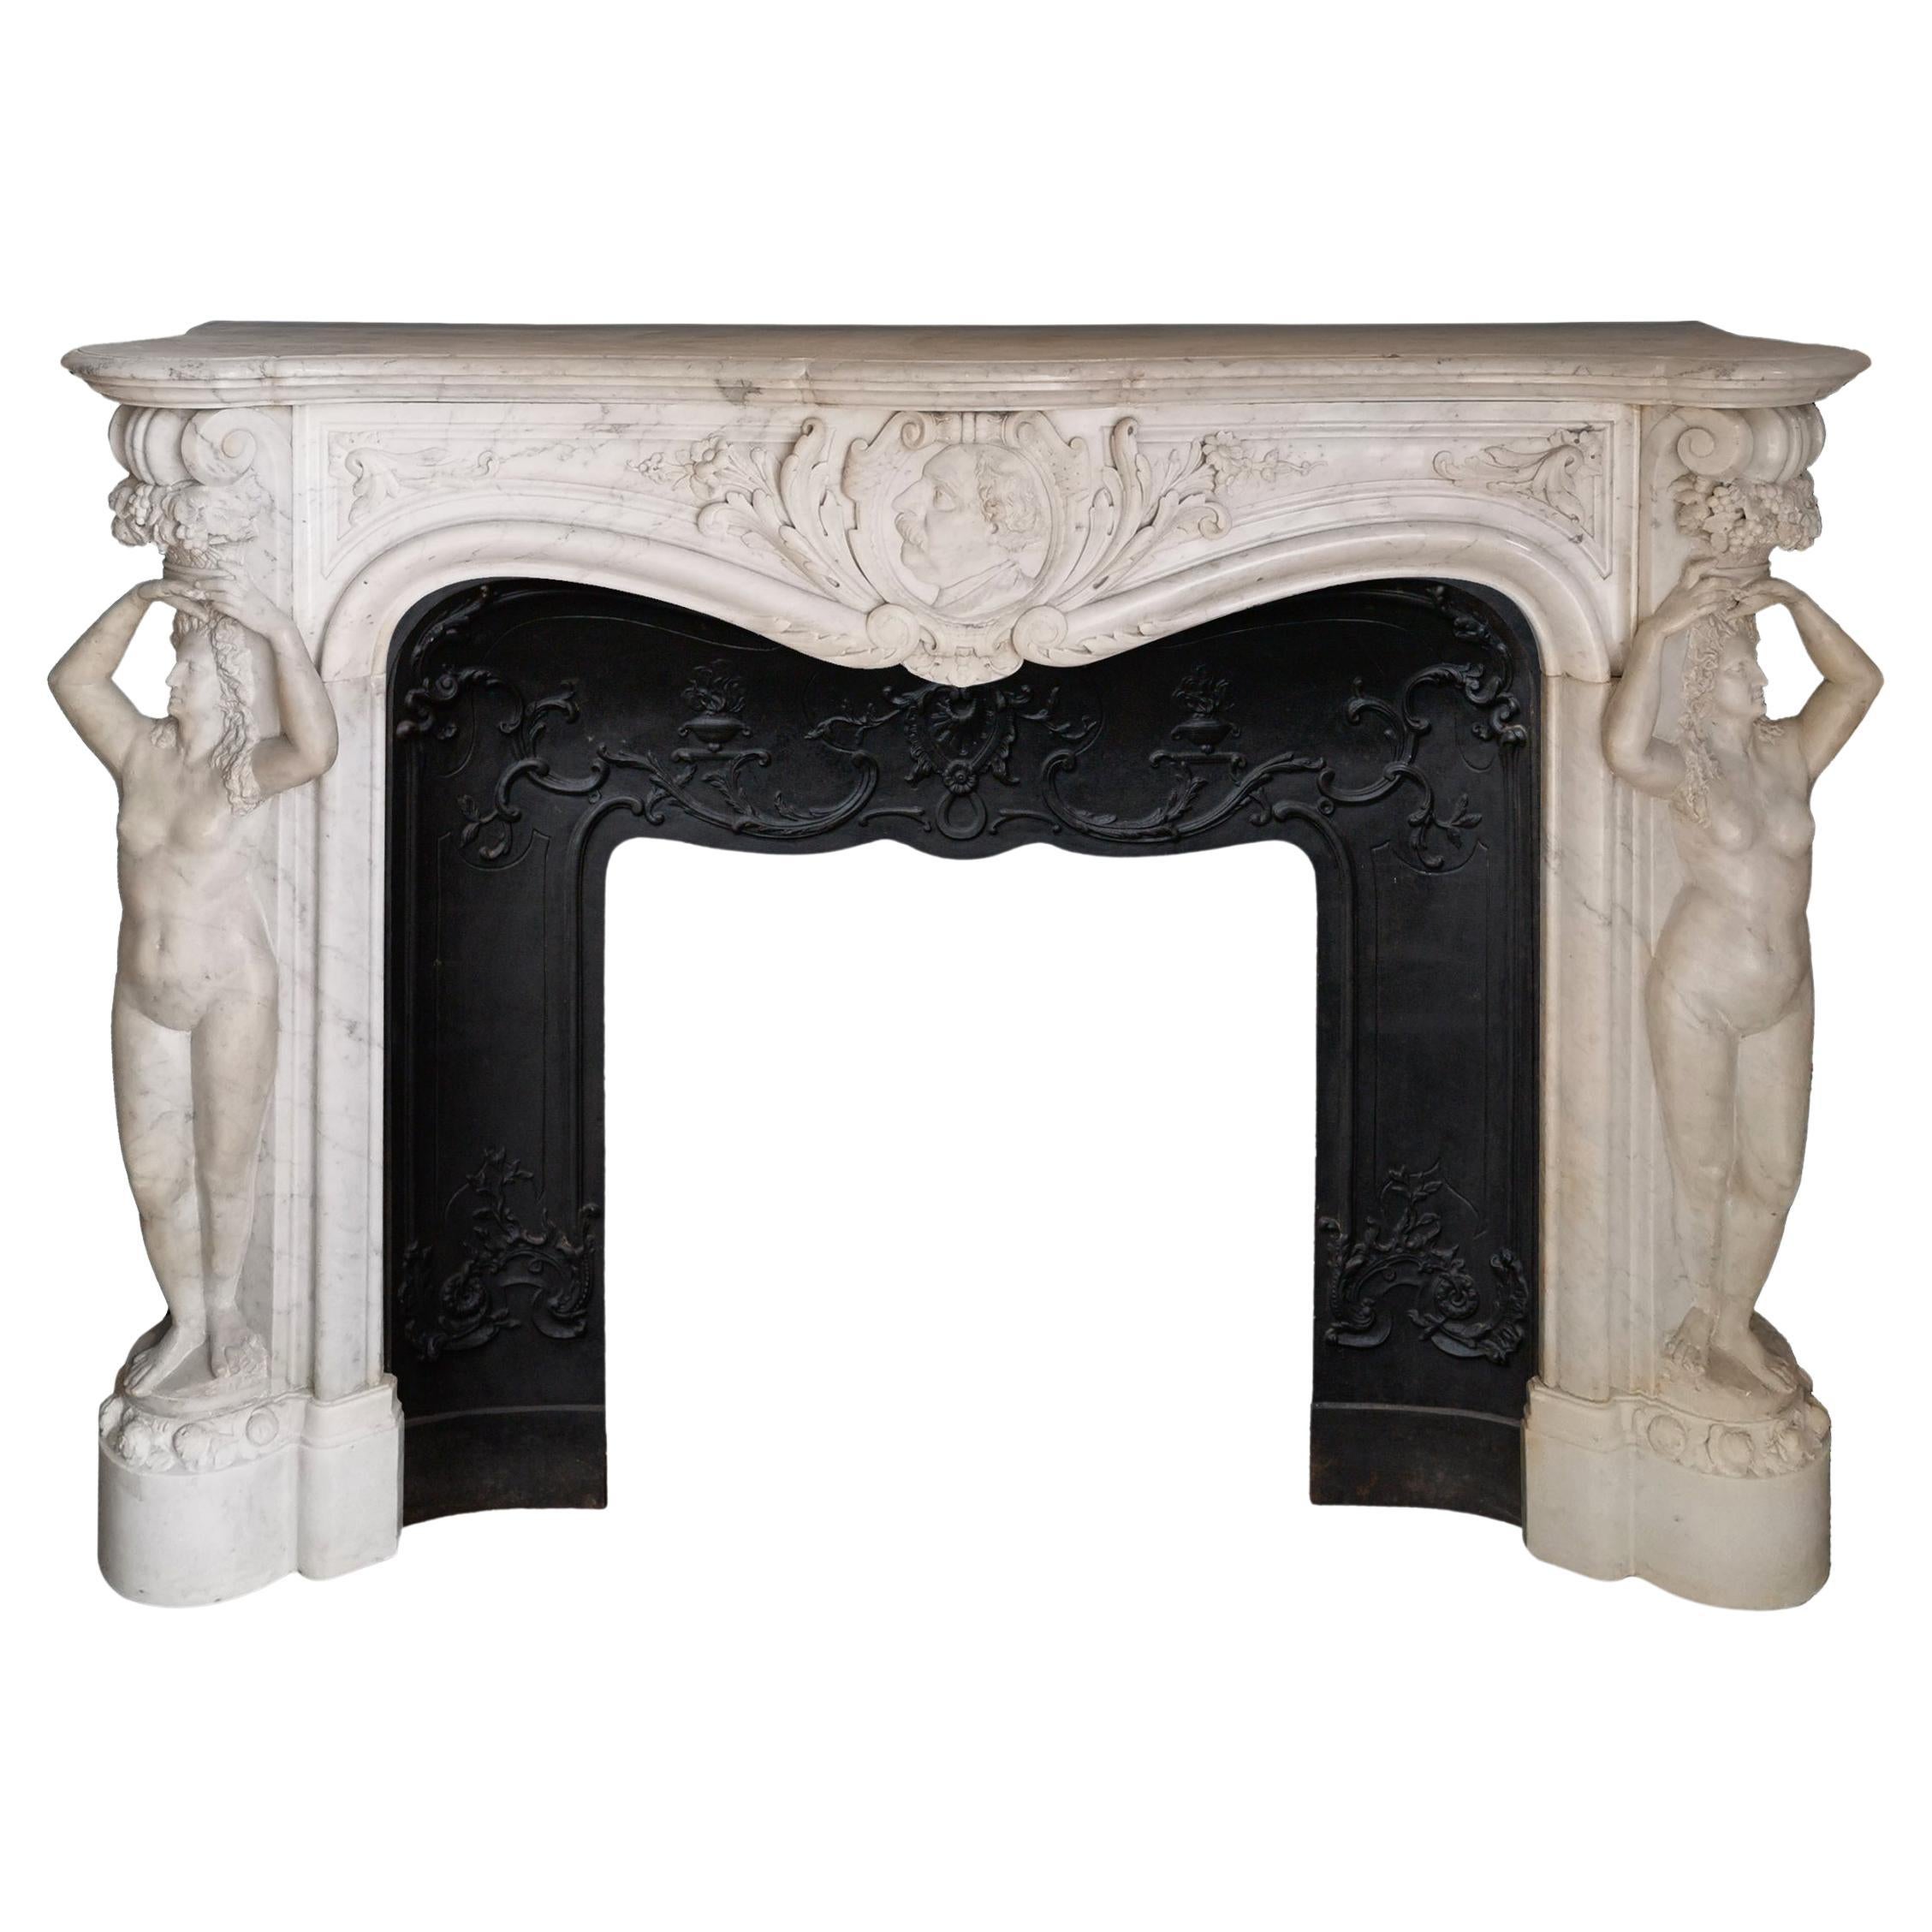 Napoleon III Marble Fireplace with Caryatids, Unique Creation, 1880 For Sale